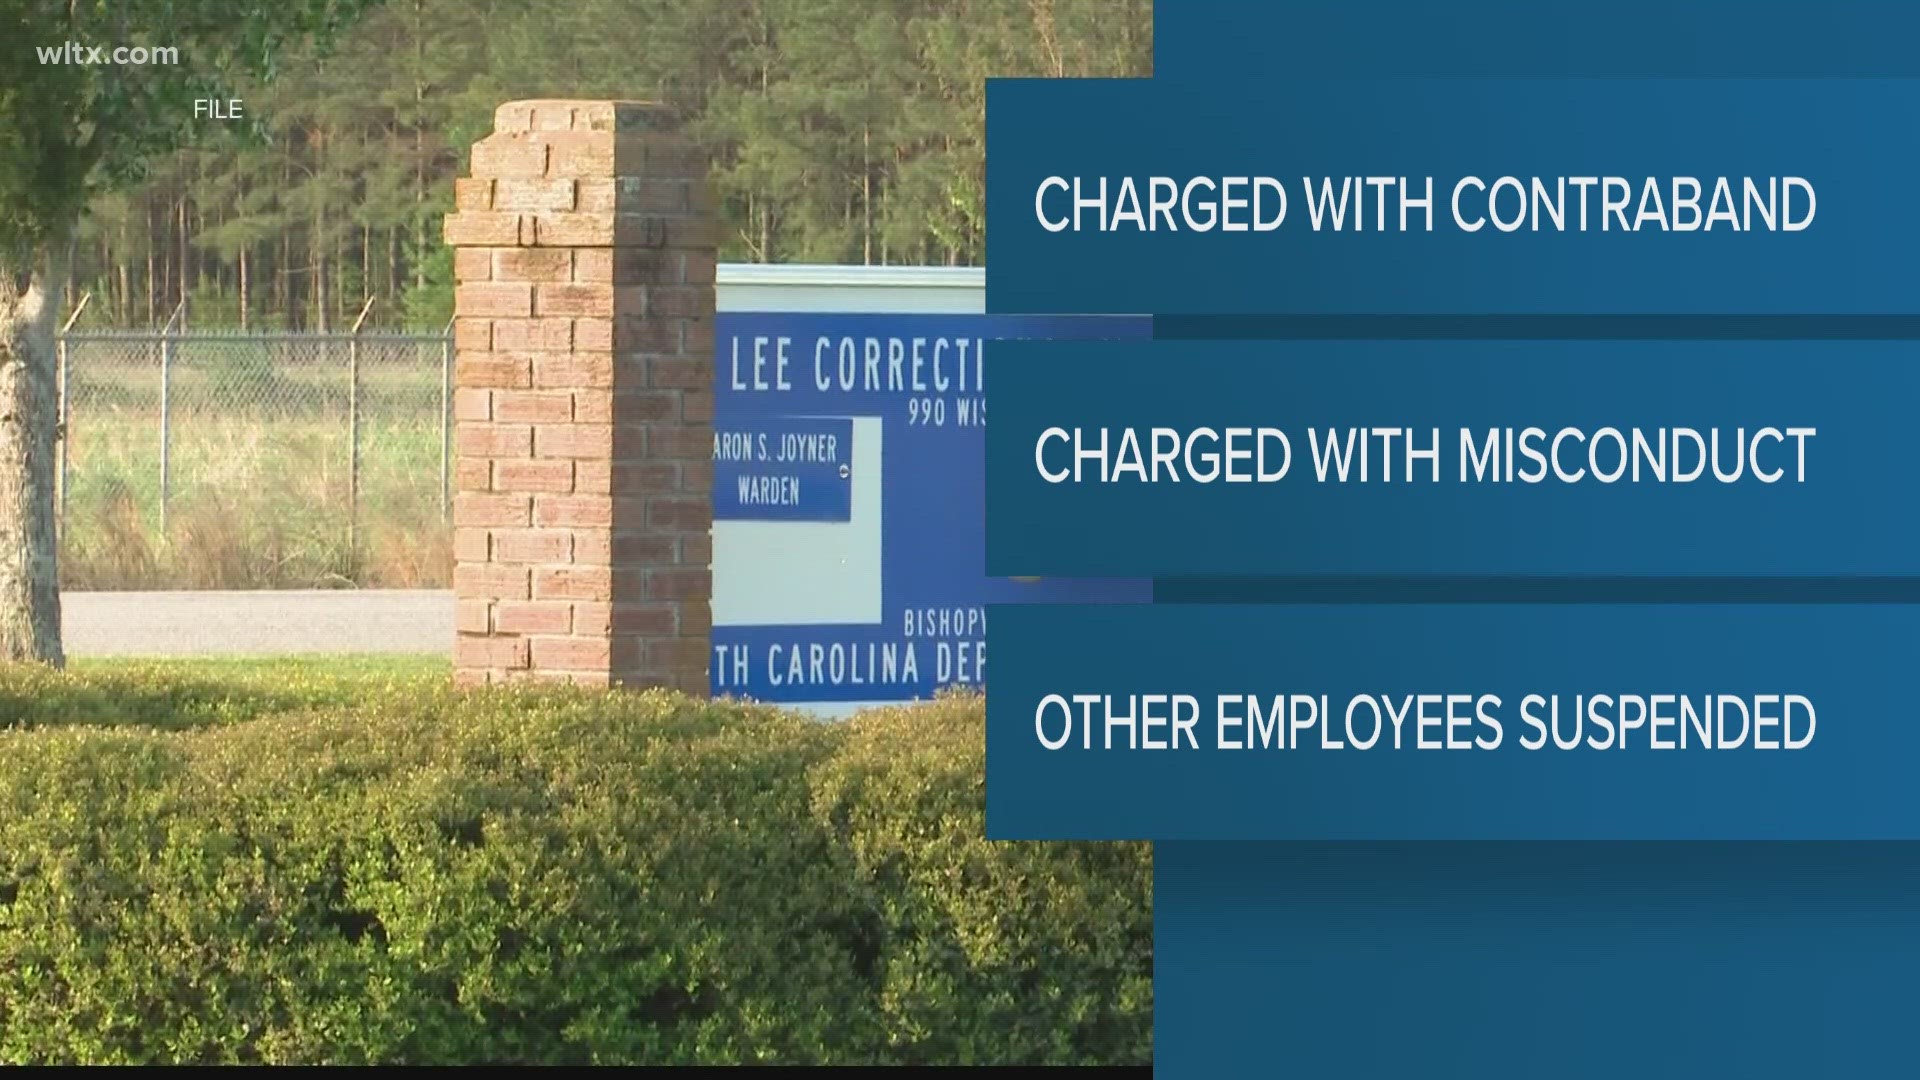 Two former corrections employees at Lee Correctional have been fired and arrested.